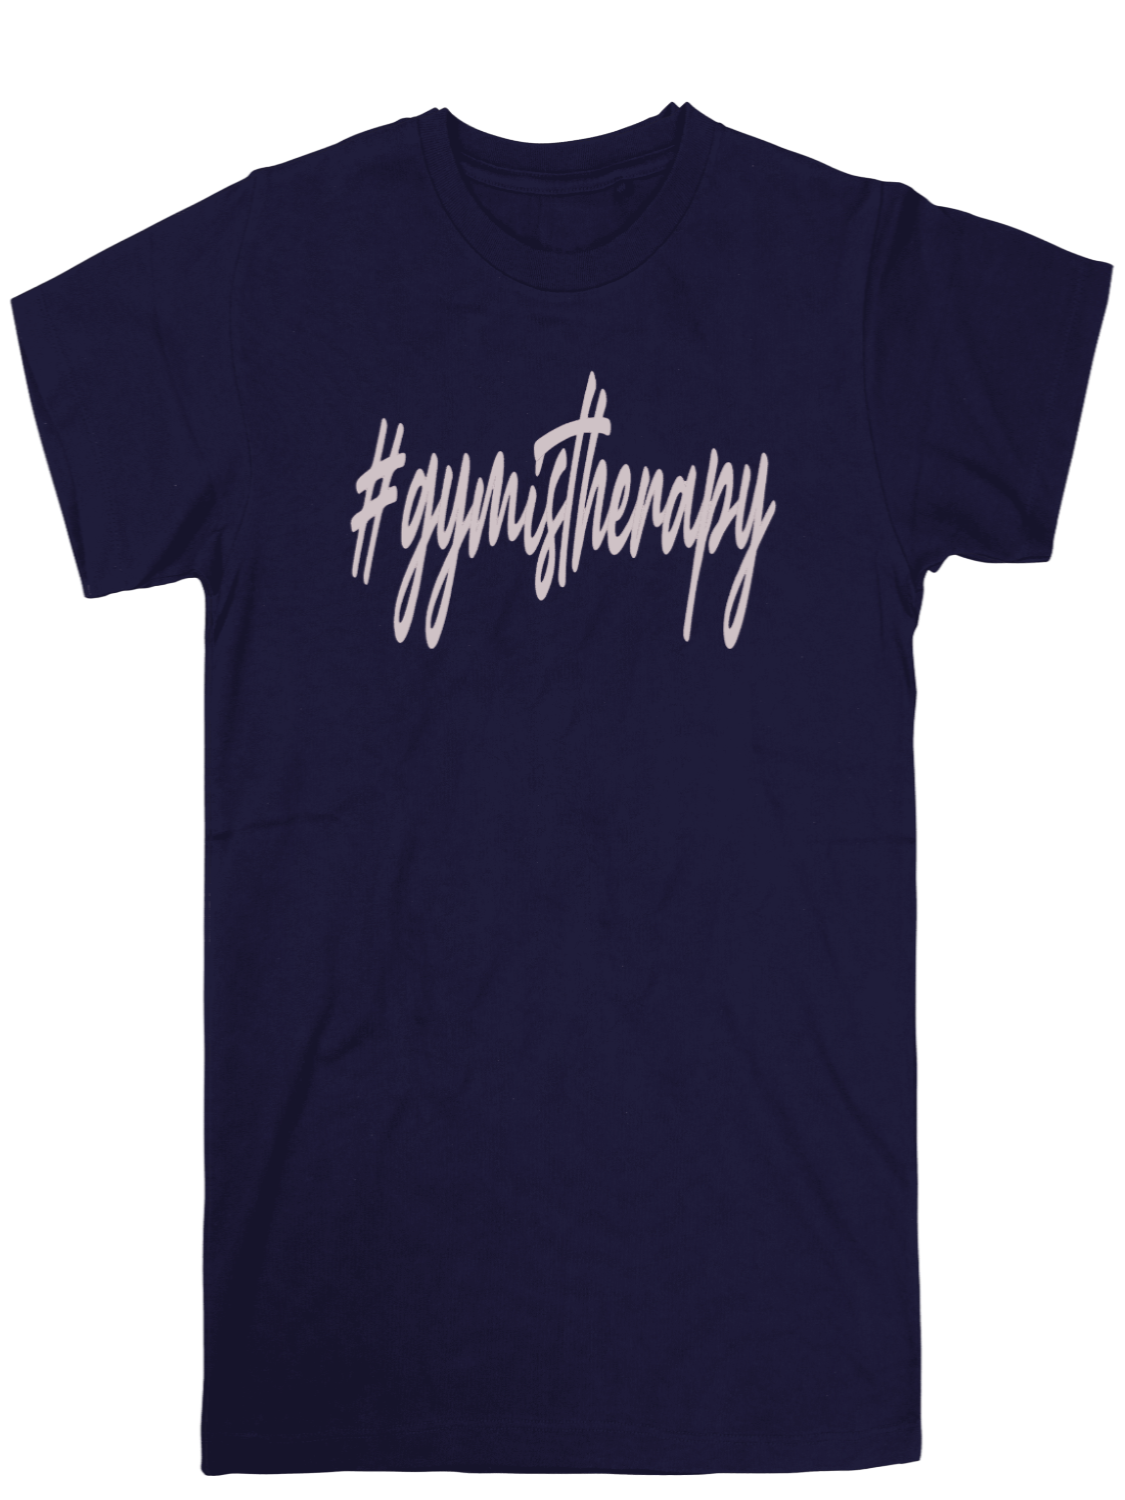 #gymistherapy t-shirt